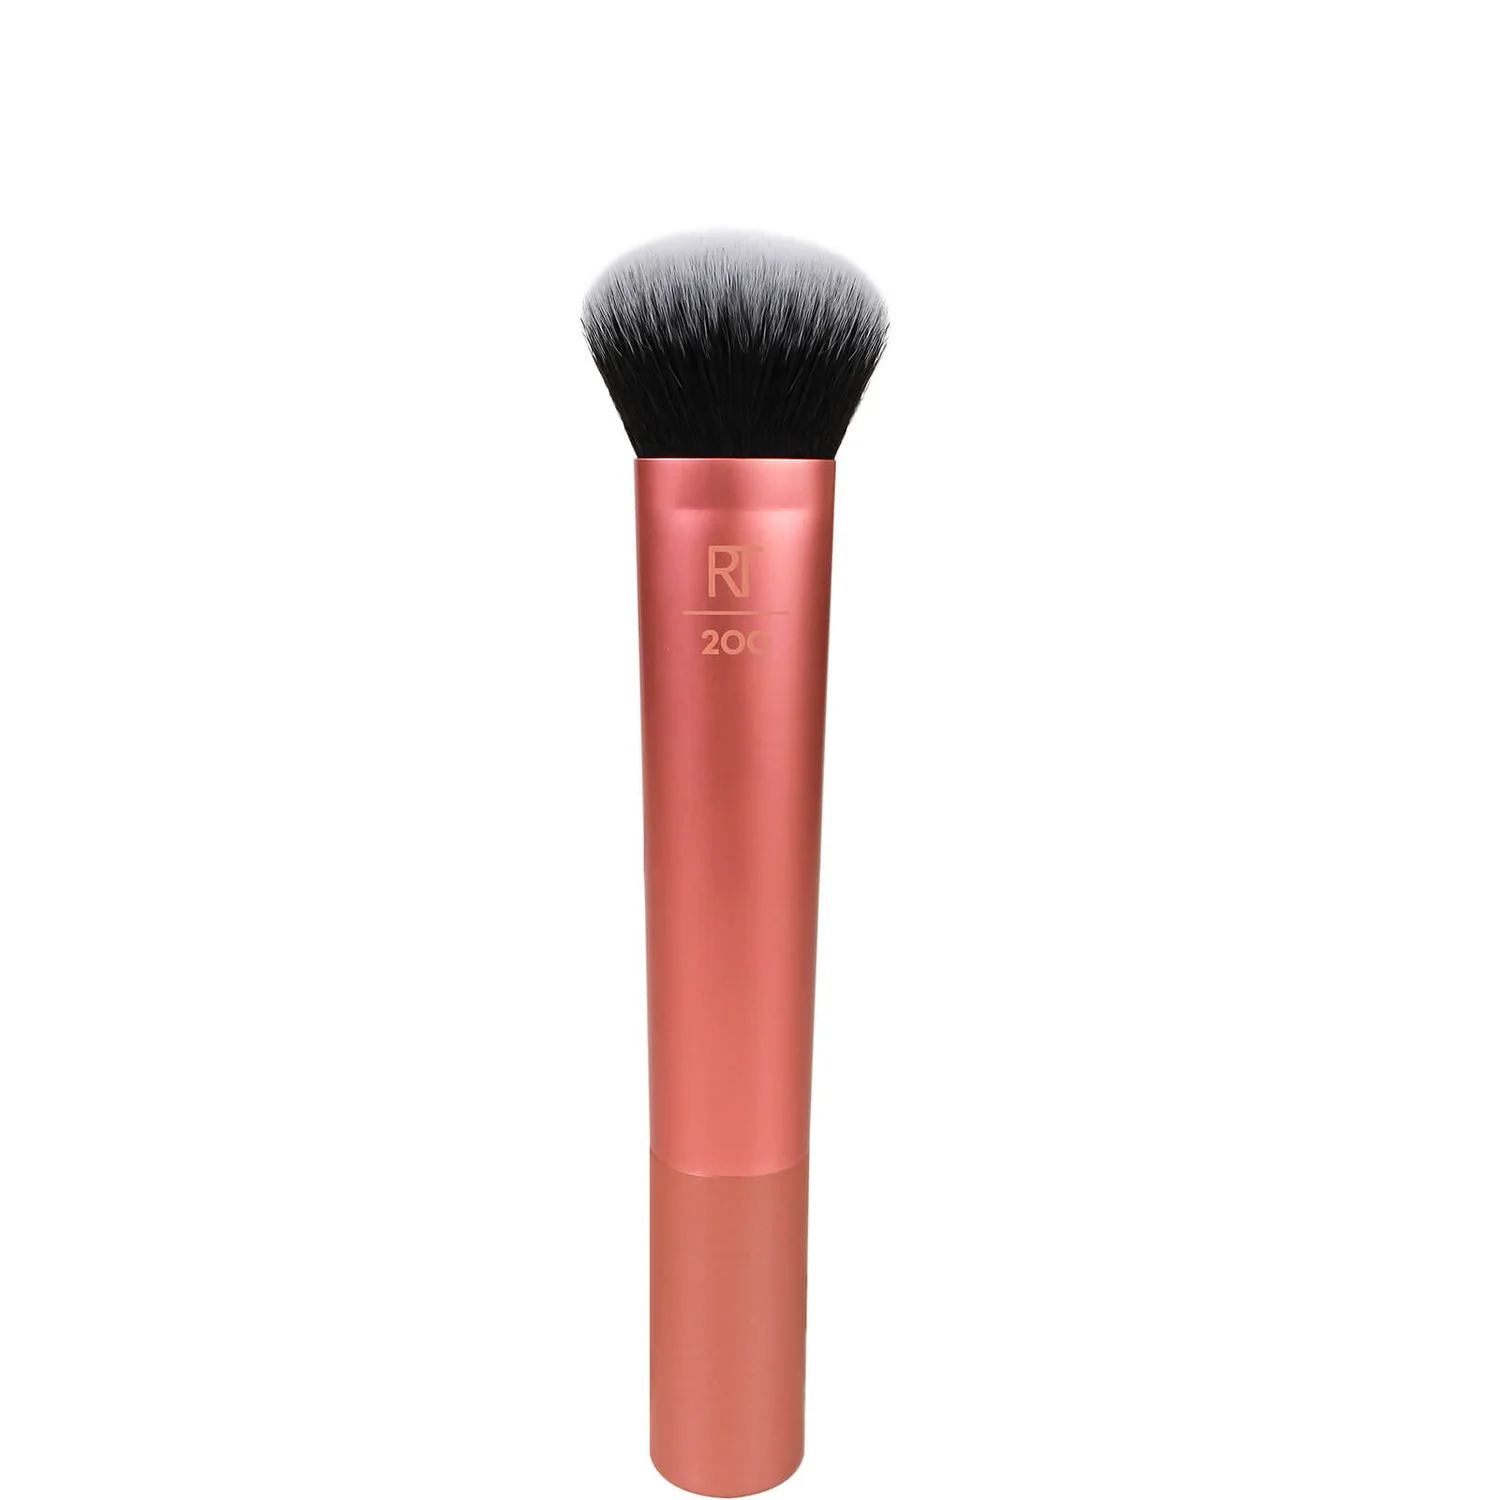 Real Techniques RT200 Expert Face Brush